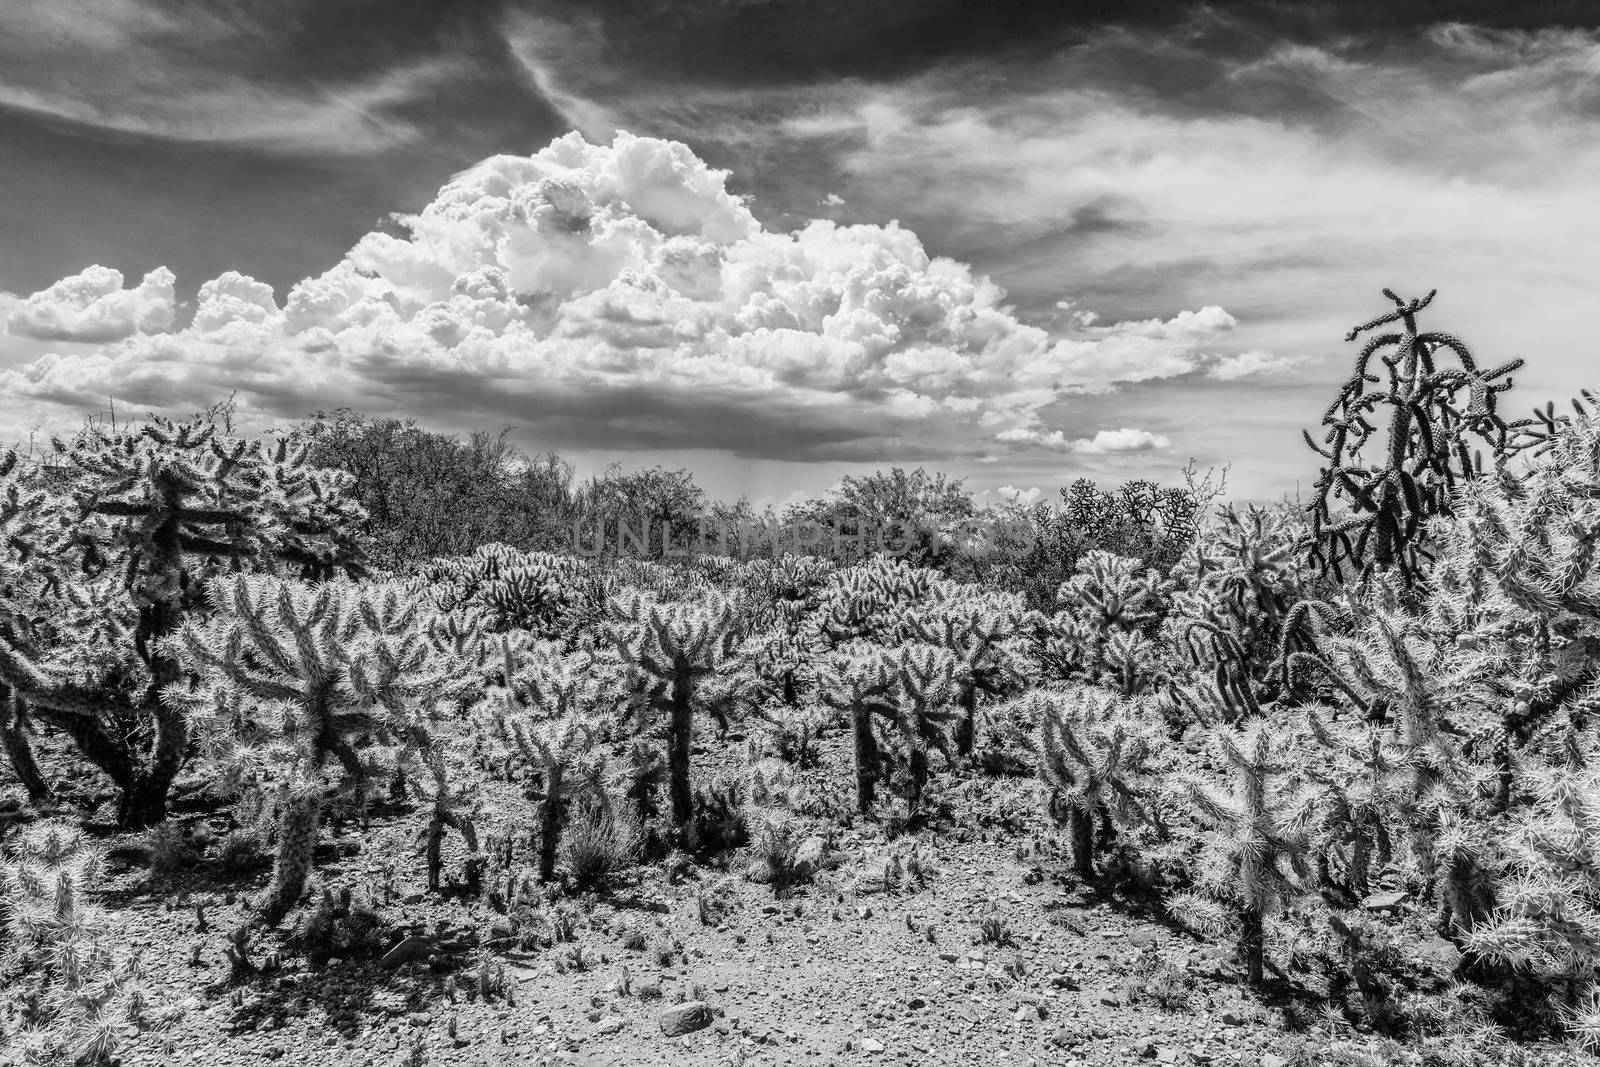 Black and white picture of tiny cactus shrubs in desert